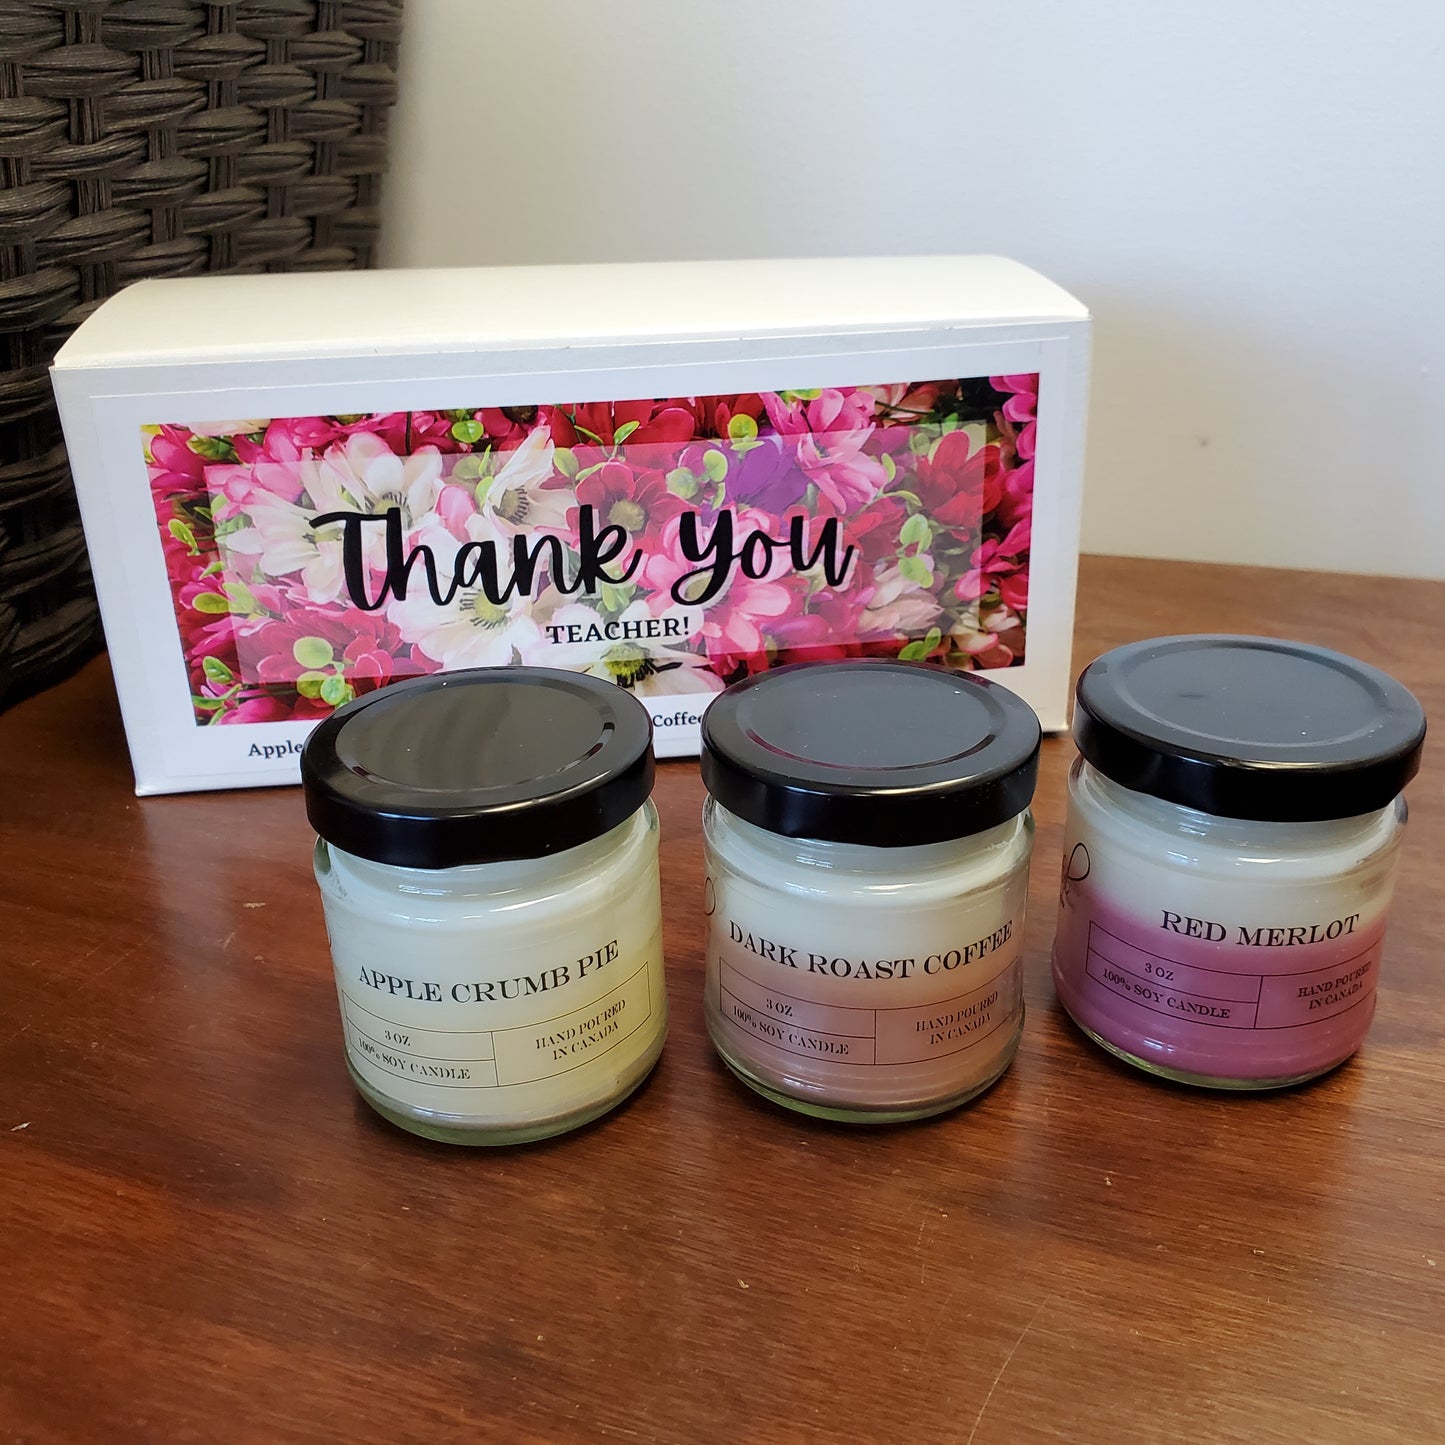 This Thank You Teacher set includes Apple Crumble Pie, Dark Roast Coffee, and Red Merlot Candles.  